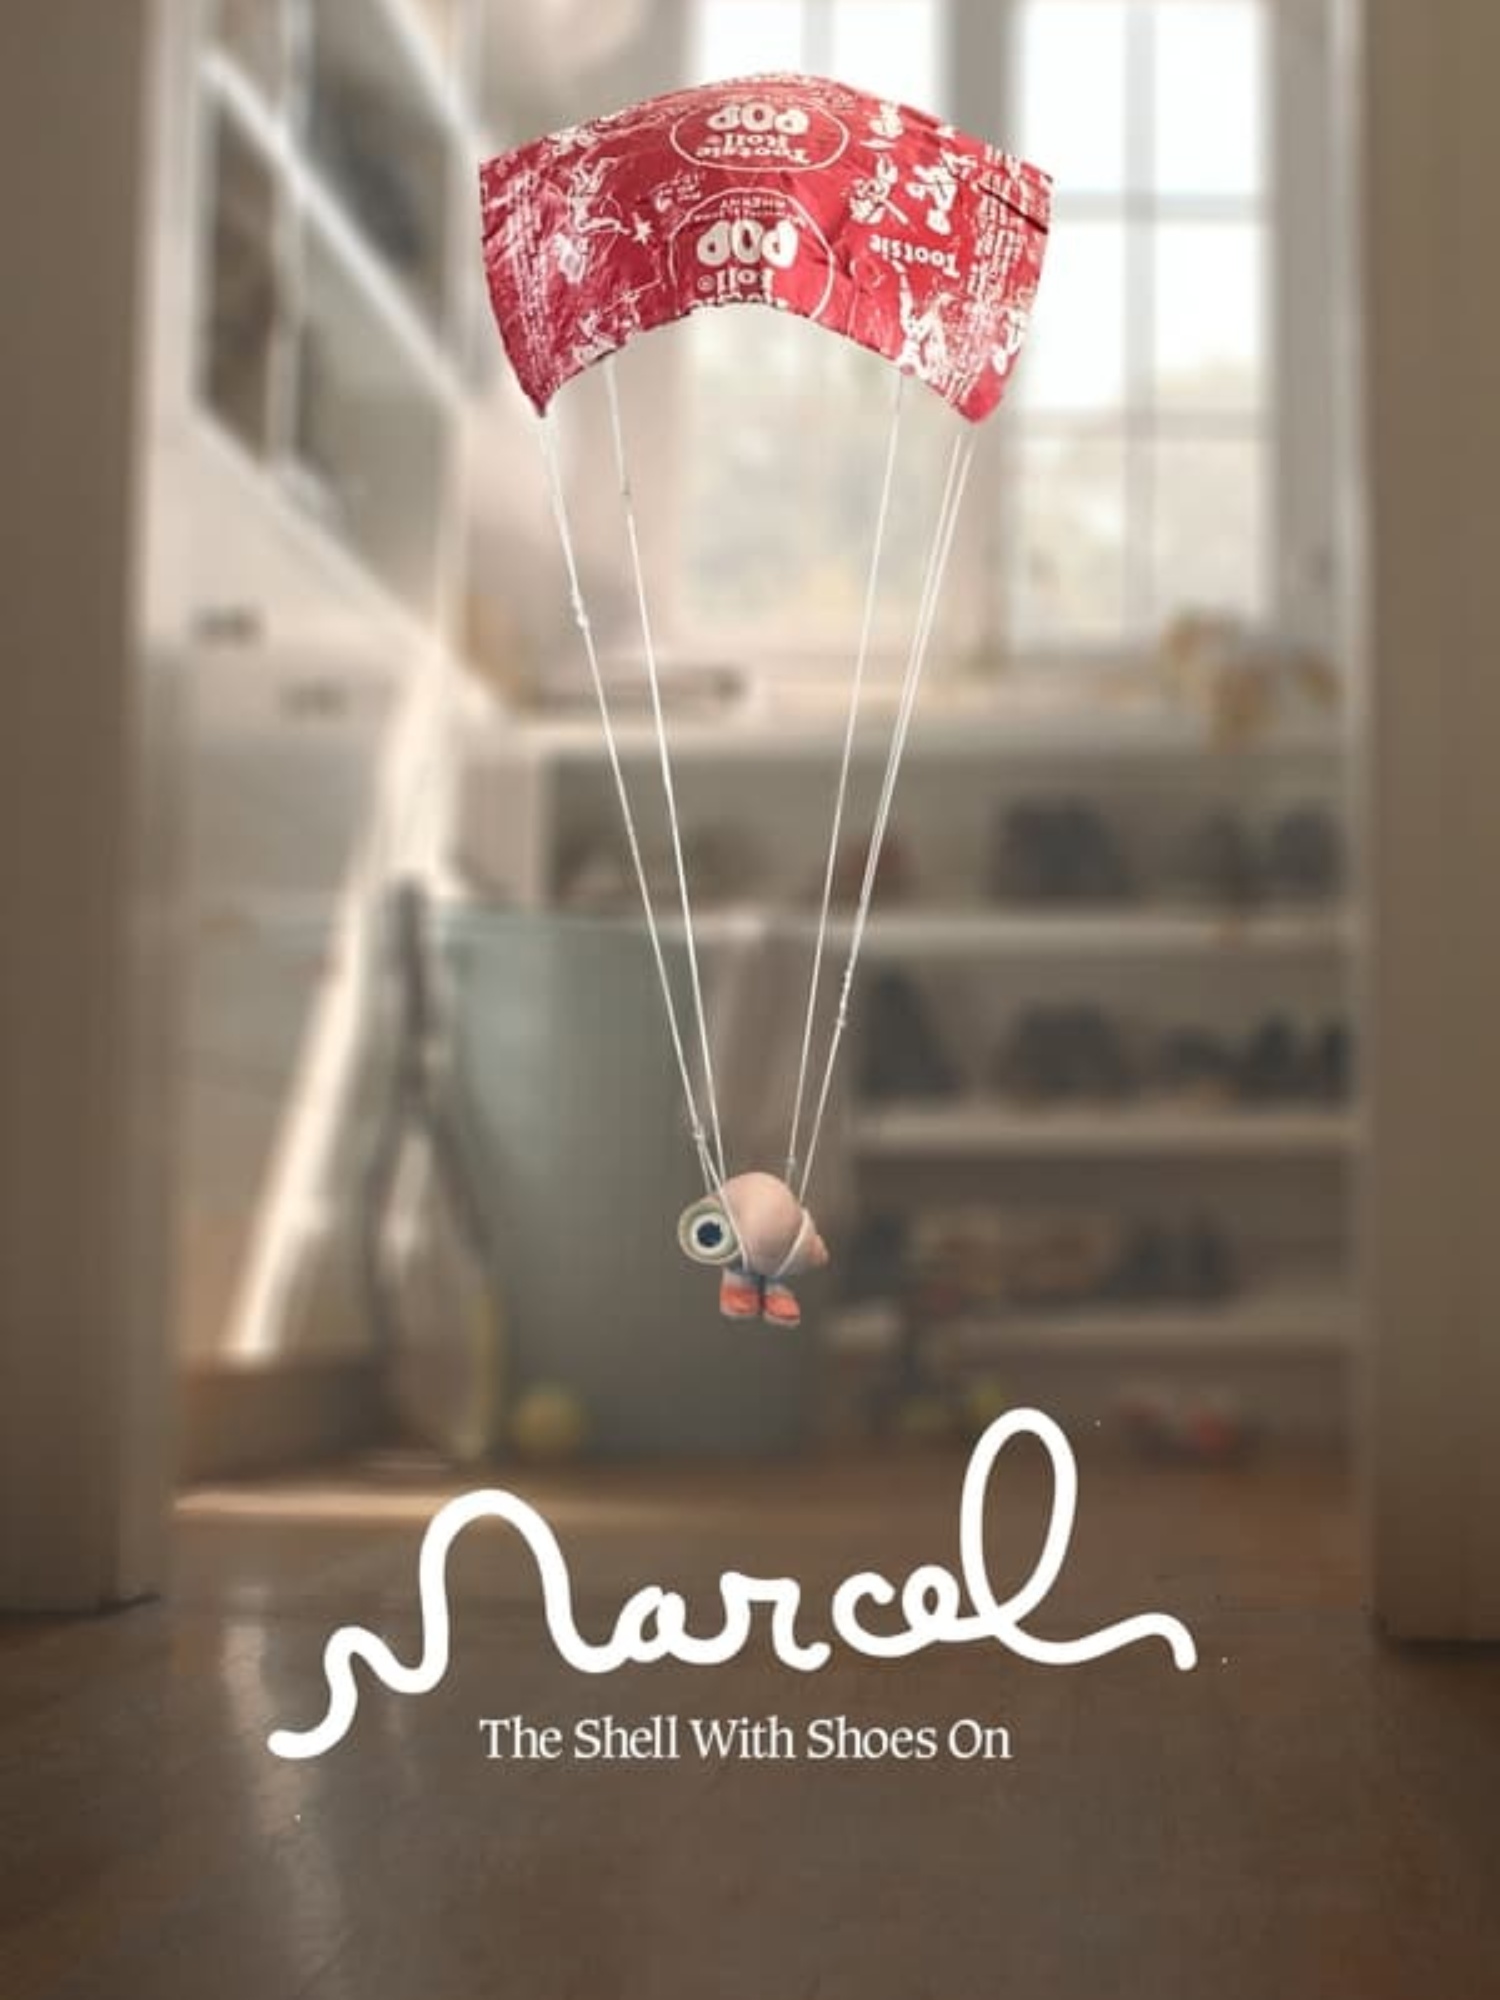 Podcast : Kids Corner – Marcel the Shell with Shoes On